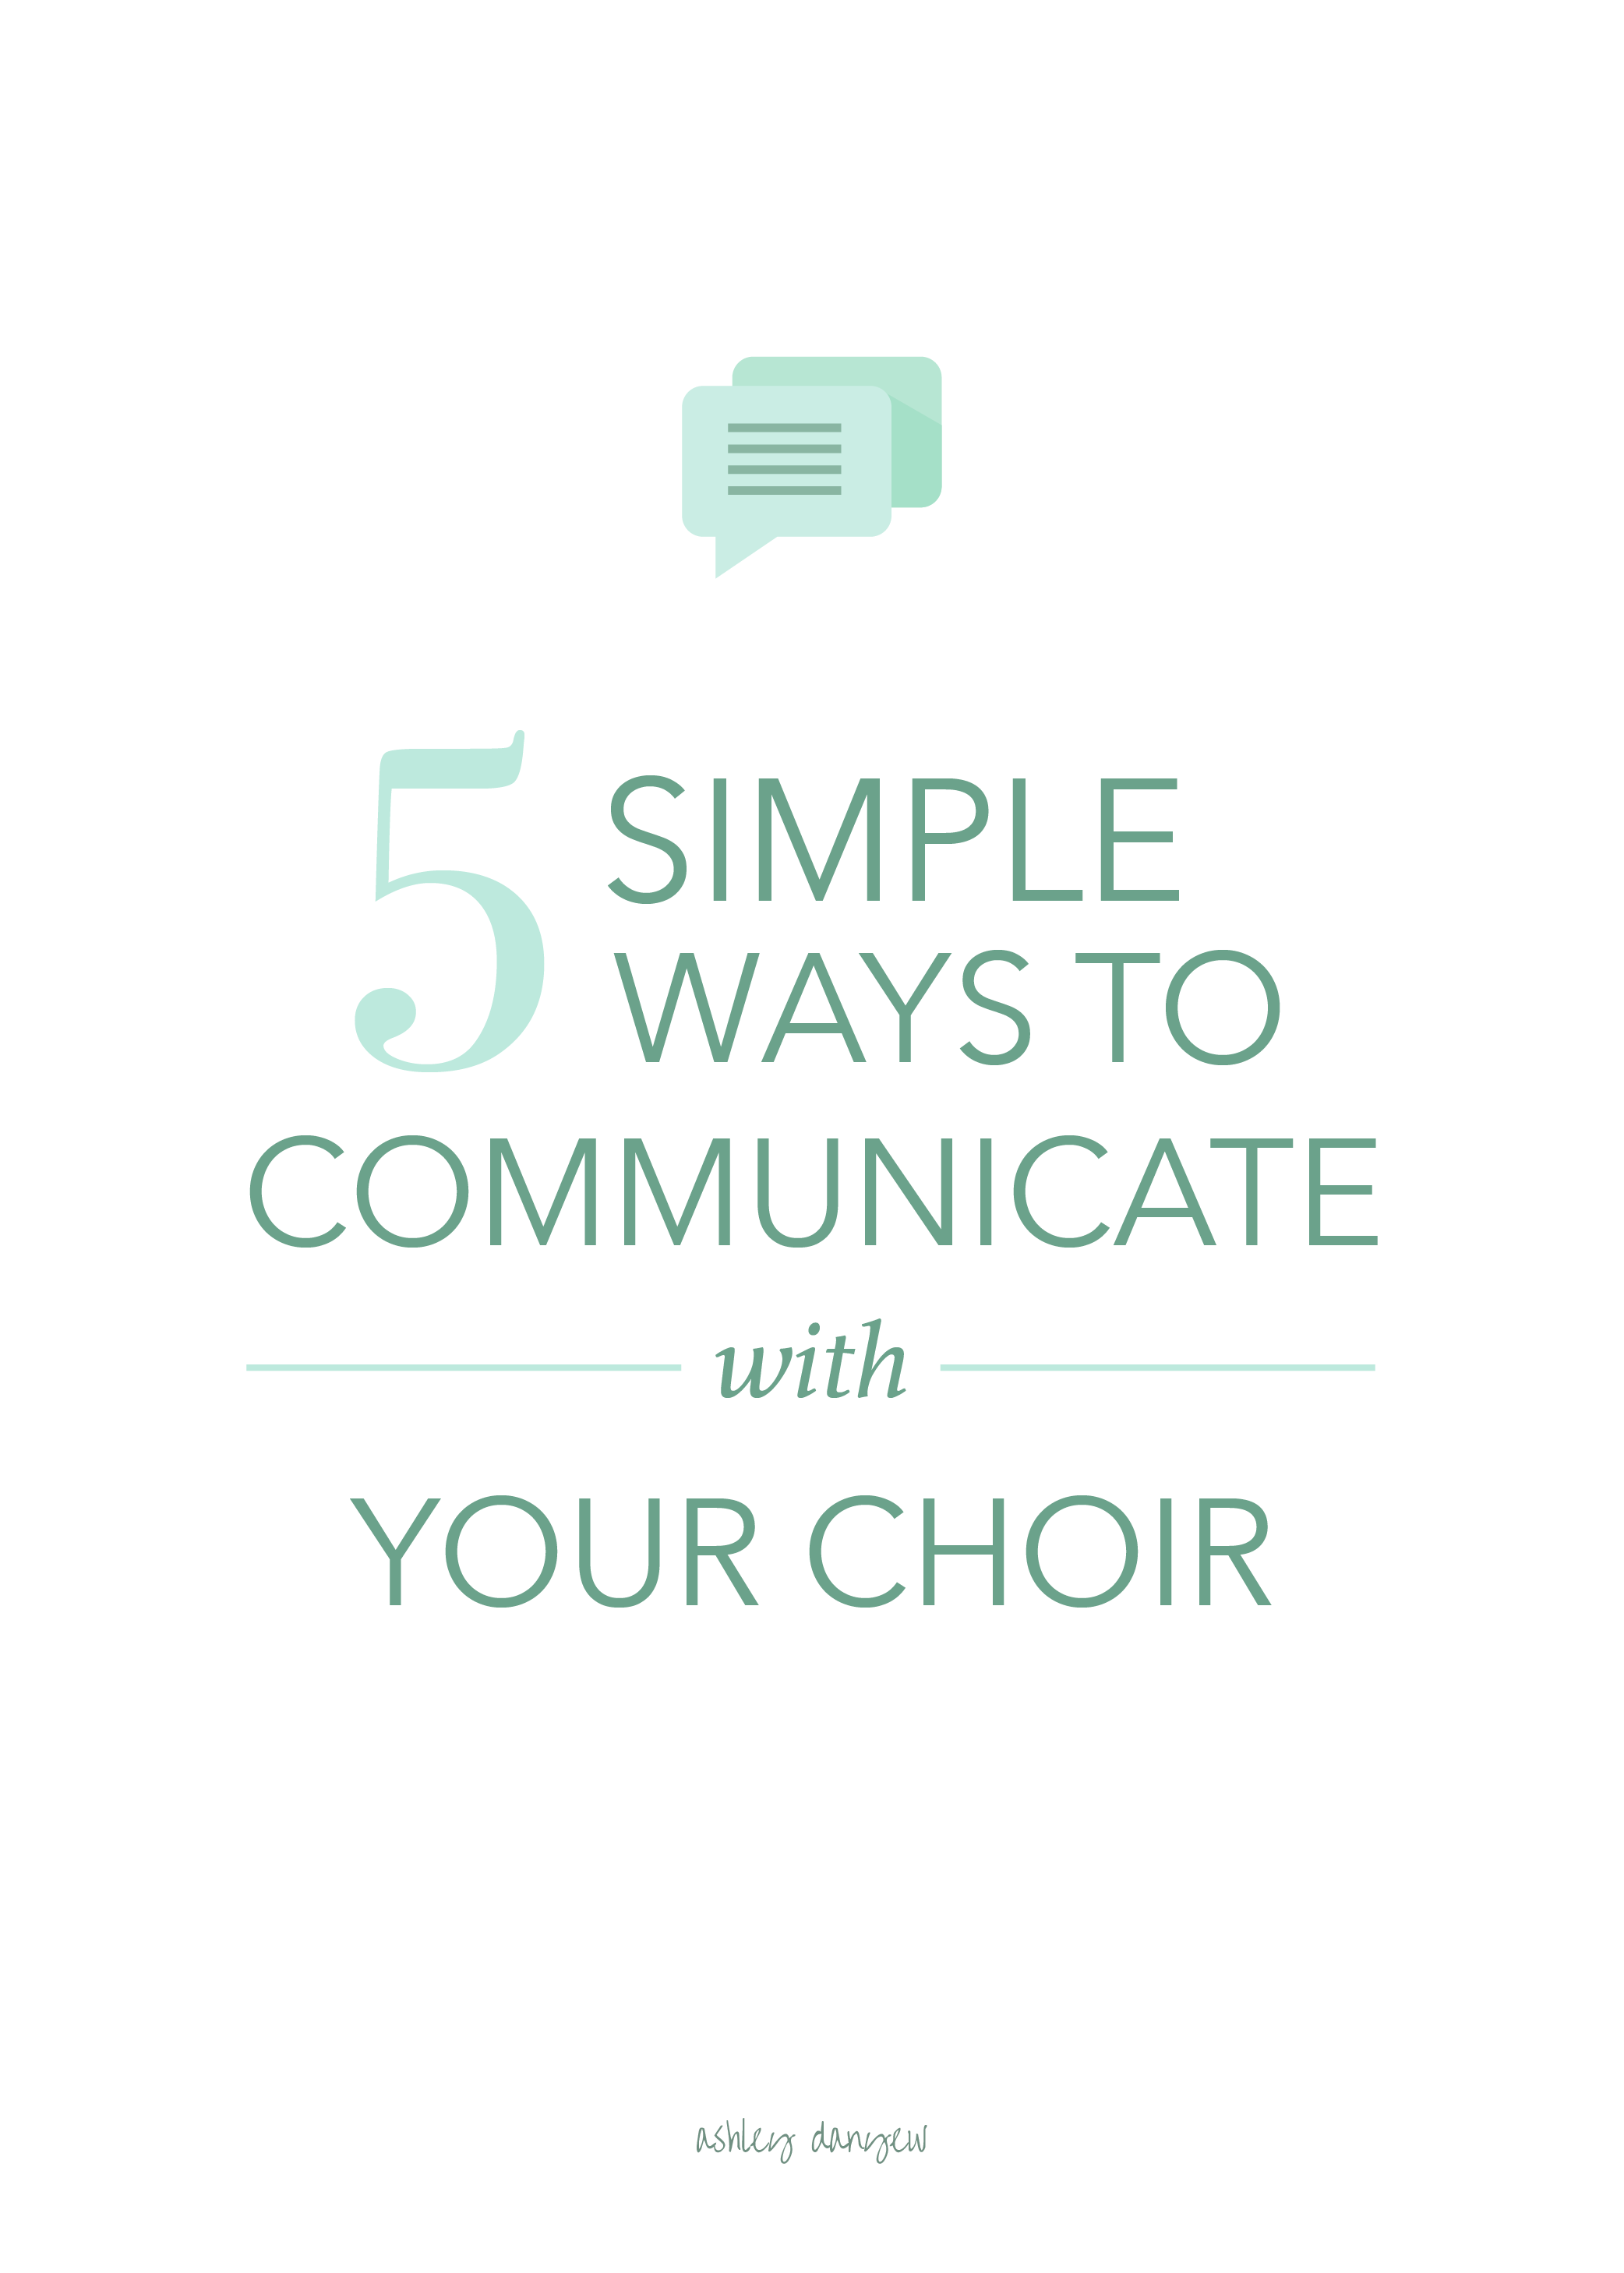 Copy of 5 Simple Ways to Communicate with Your Choir